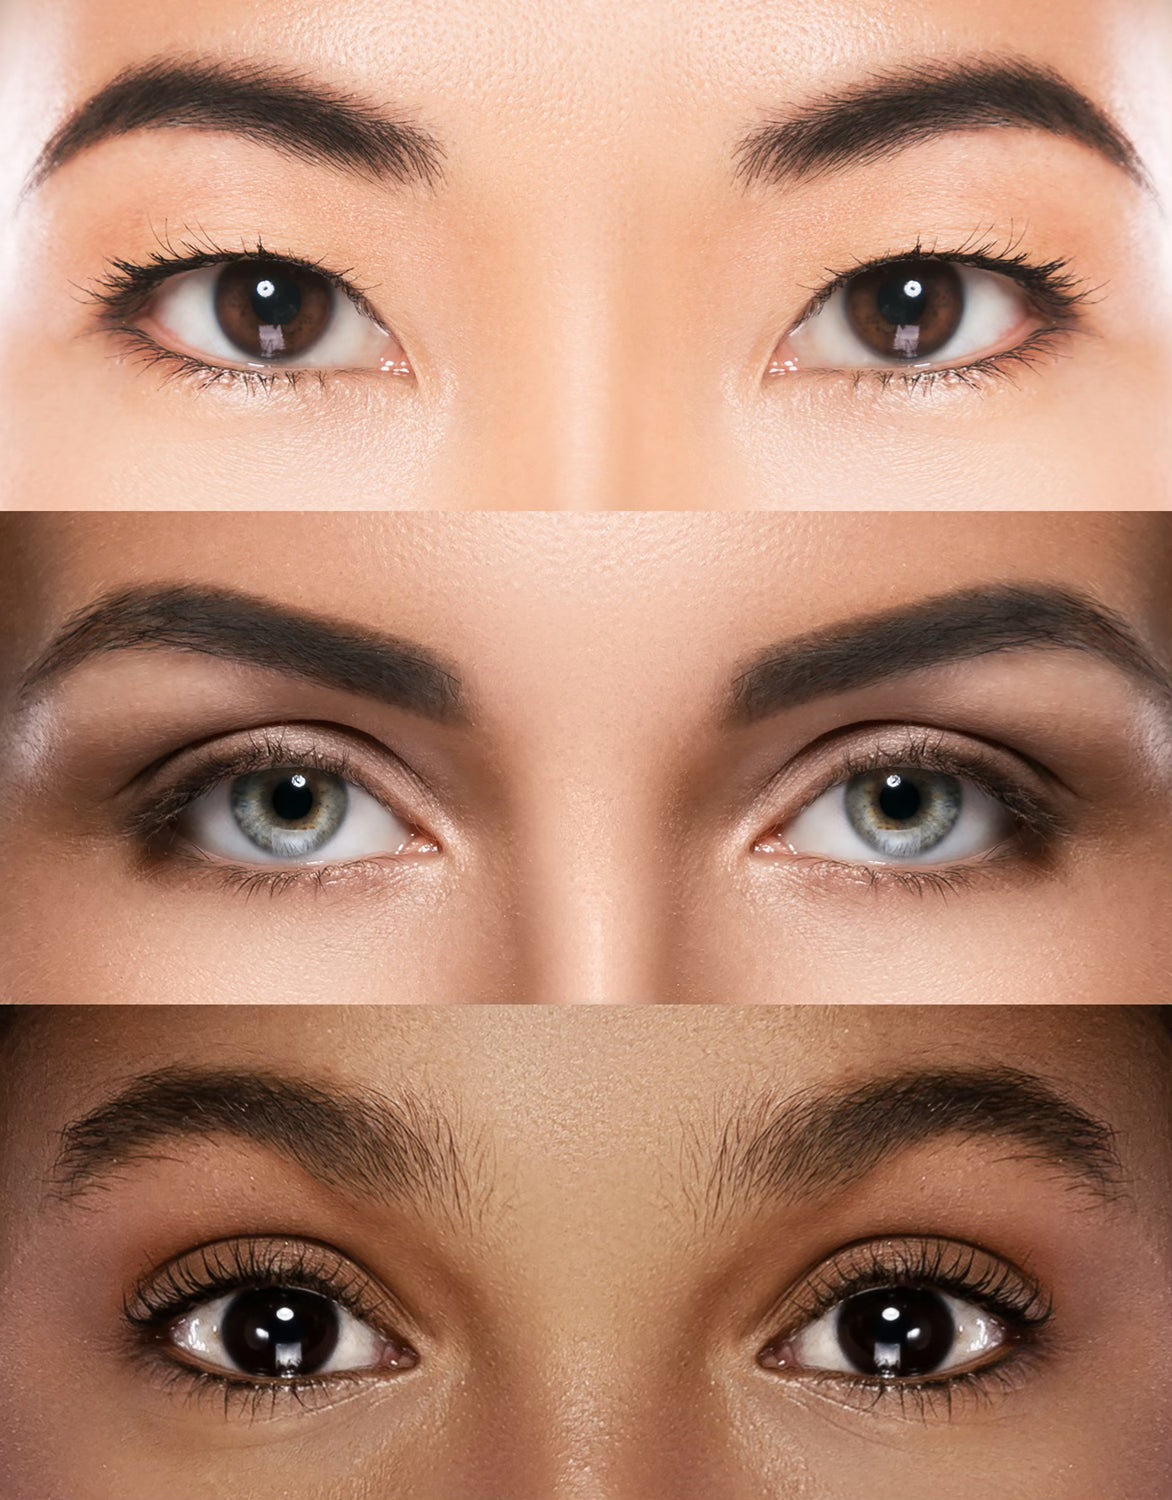 Three female eyes of different ethnicities 